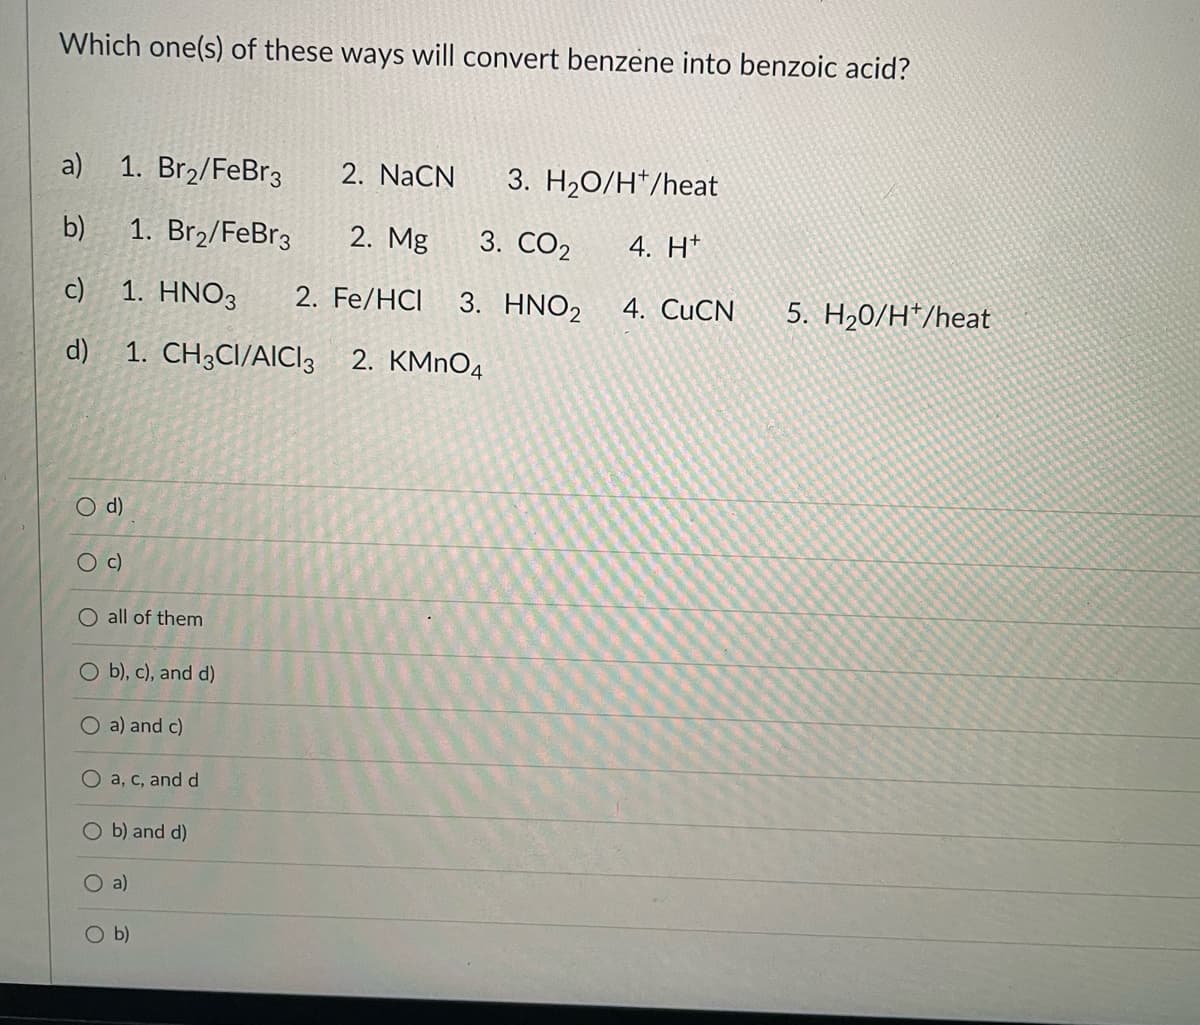 Which one(s) of these ways will convert benzene into benzoic acid?
a) 1. Br2/FeBr3
2. NaCN
3. H20/H*/heat
b)
1. Br2/FeBr3
2. Mg
3. CO2
4. H*
c) 1. HNO3
2. Fe/HCI
3. HNO2
4. CUCN
5. H20/H*/heat
d)
1. CH3CI/AICI3 2. KMnO4
O d)
Oc)
O all of them
O b), c), and d)
O a) and c)
O a, c, and d
O b) and d)
O a)
O b)
